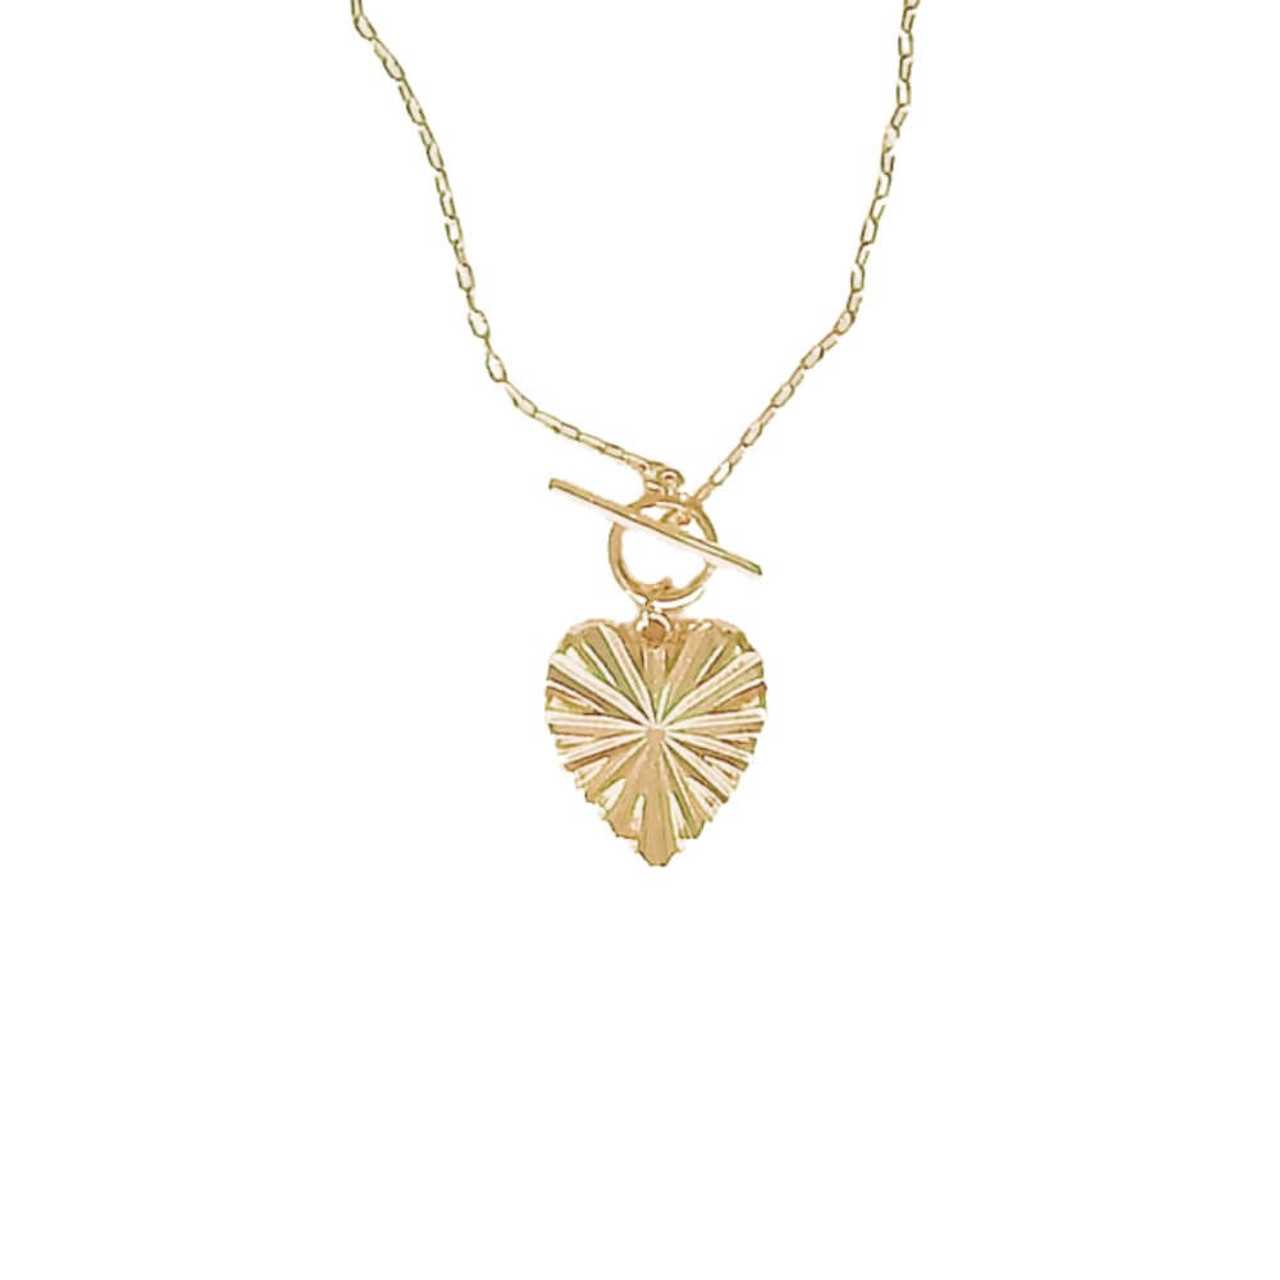 Gold-tone necklace and 3/4" x 7/8" heart charm with embossed starburst design. Toggle clasp; 16"; nickel and lead free.